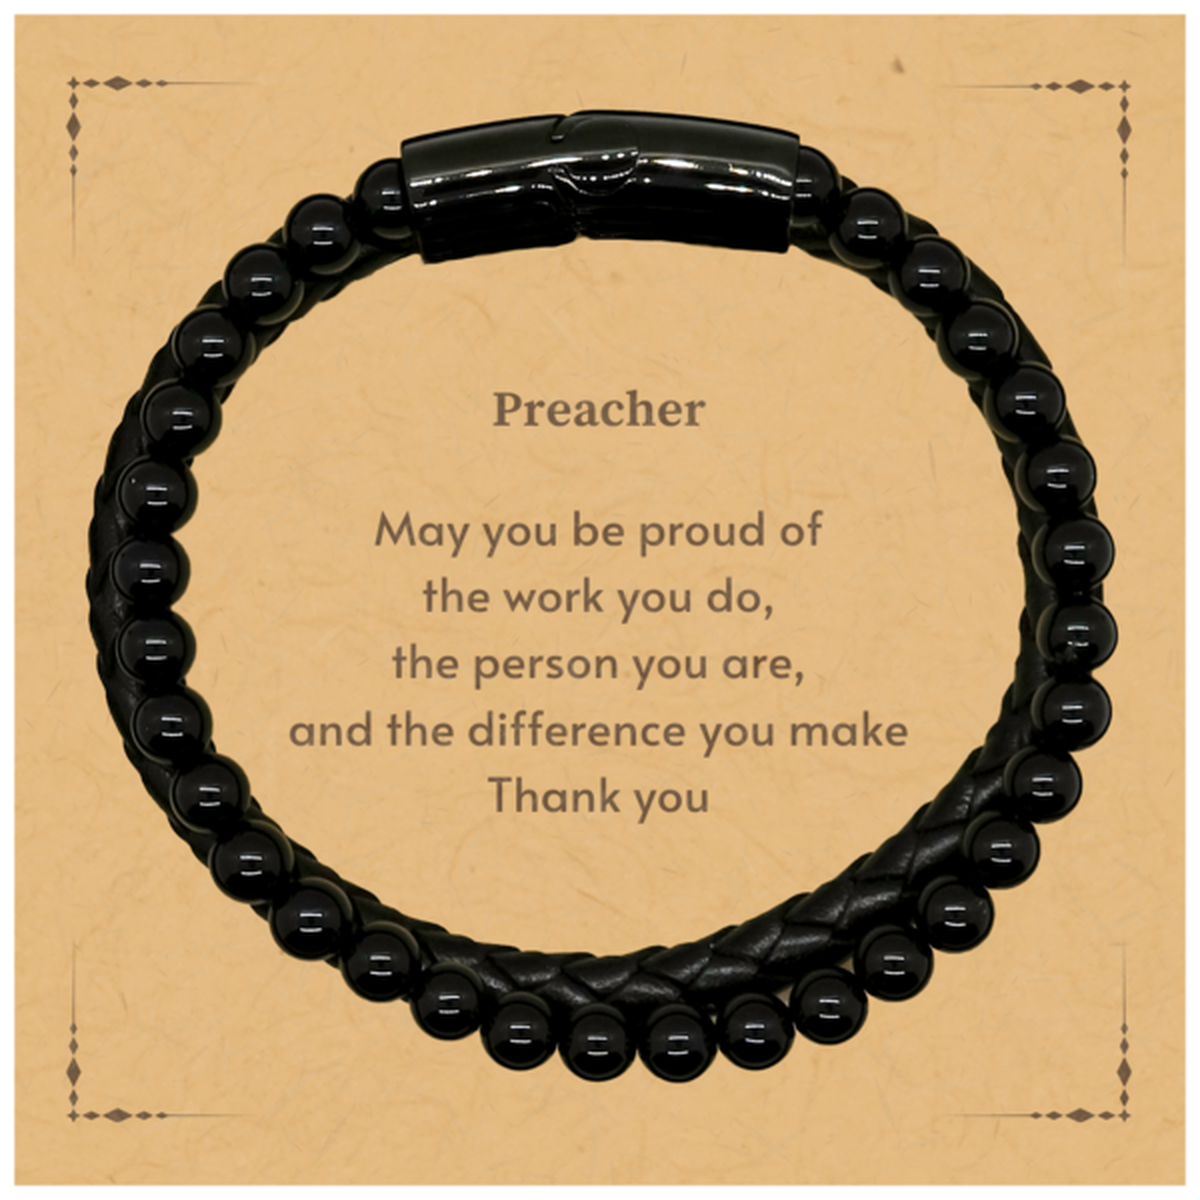 Heartwarming Stone Leather Bracelets Retirement Coworkers Gifts for Preacher, Preacher May You be proud of the work you do, the person you are Gifts for Boss Men Women Friends